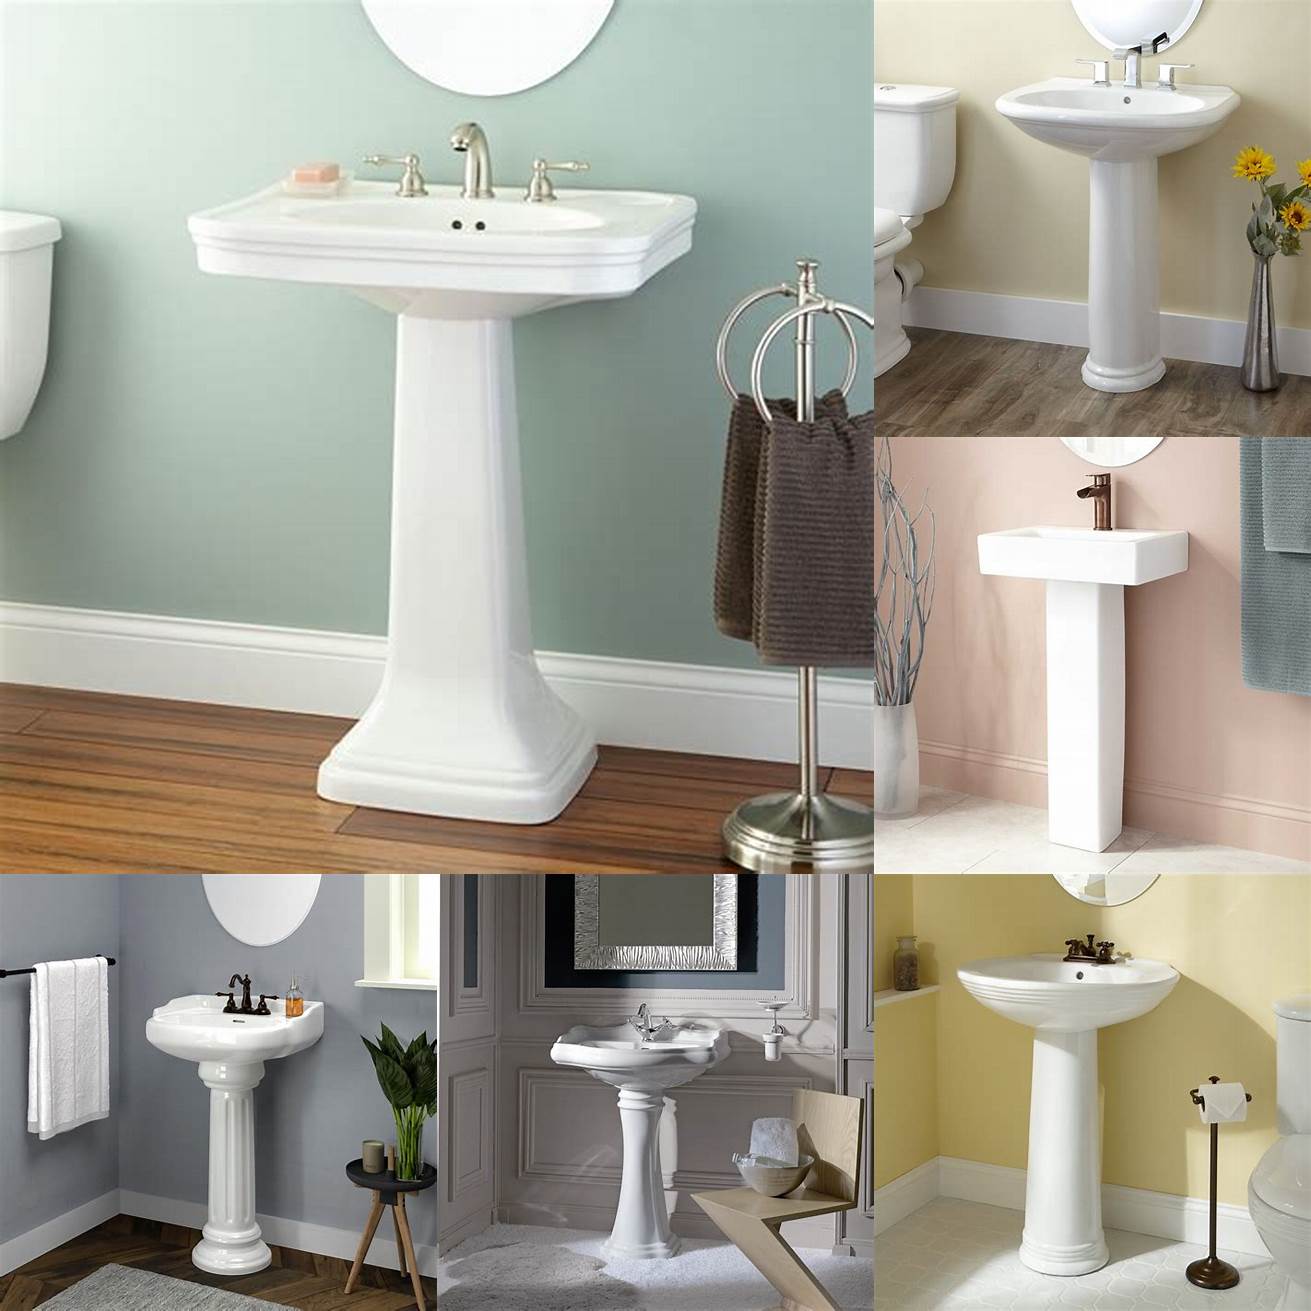 Pedestal sinks have a freestanding design that gives your bathroom a classic and elegant look They are perfect for small bathrooms because they take up less space than other types of sinks However they dont provide storage space